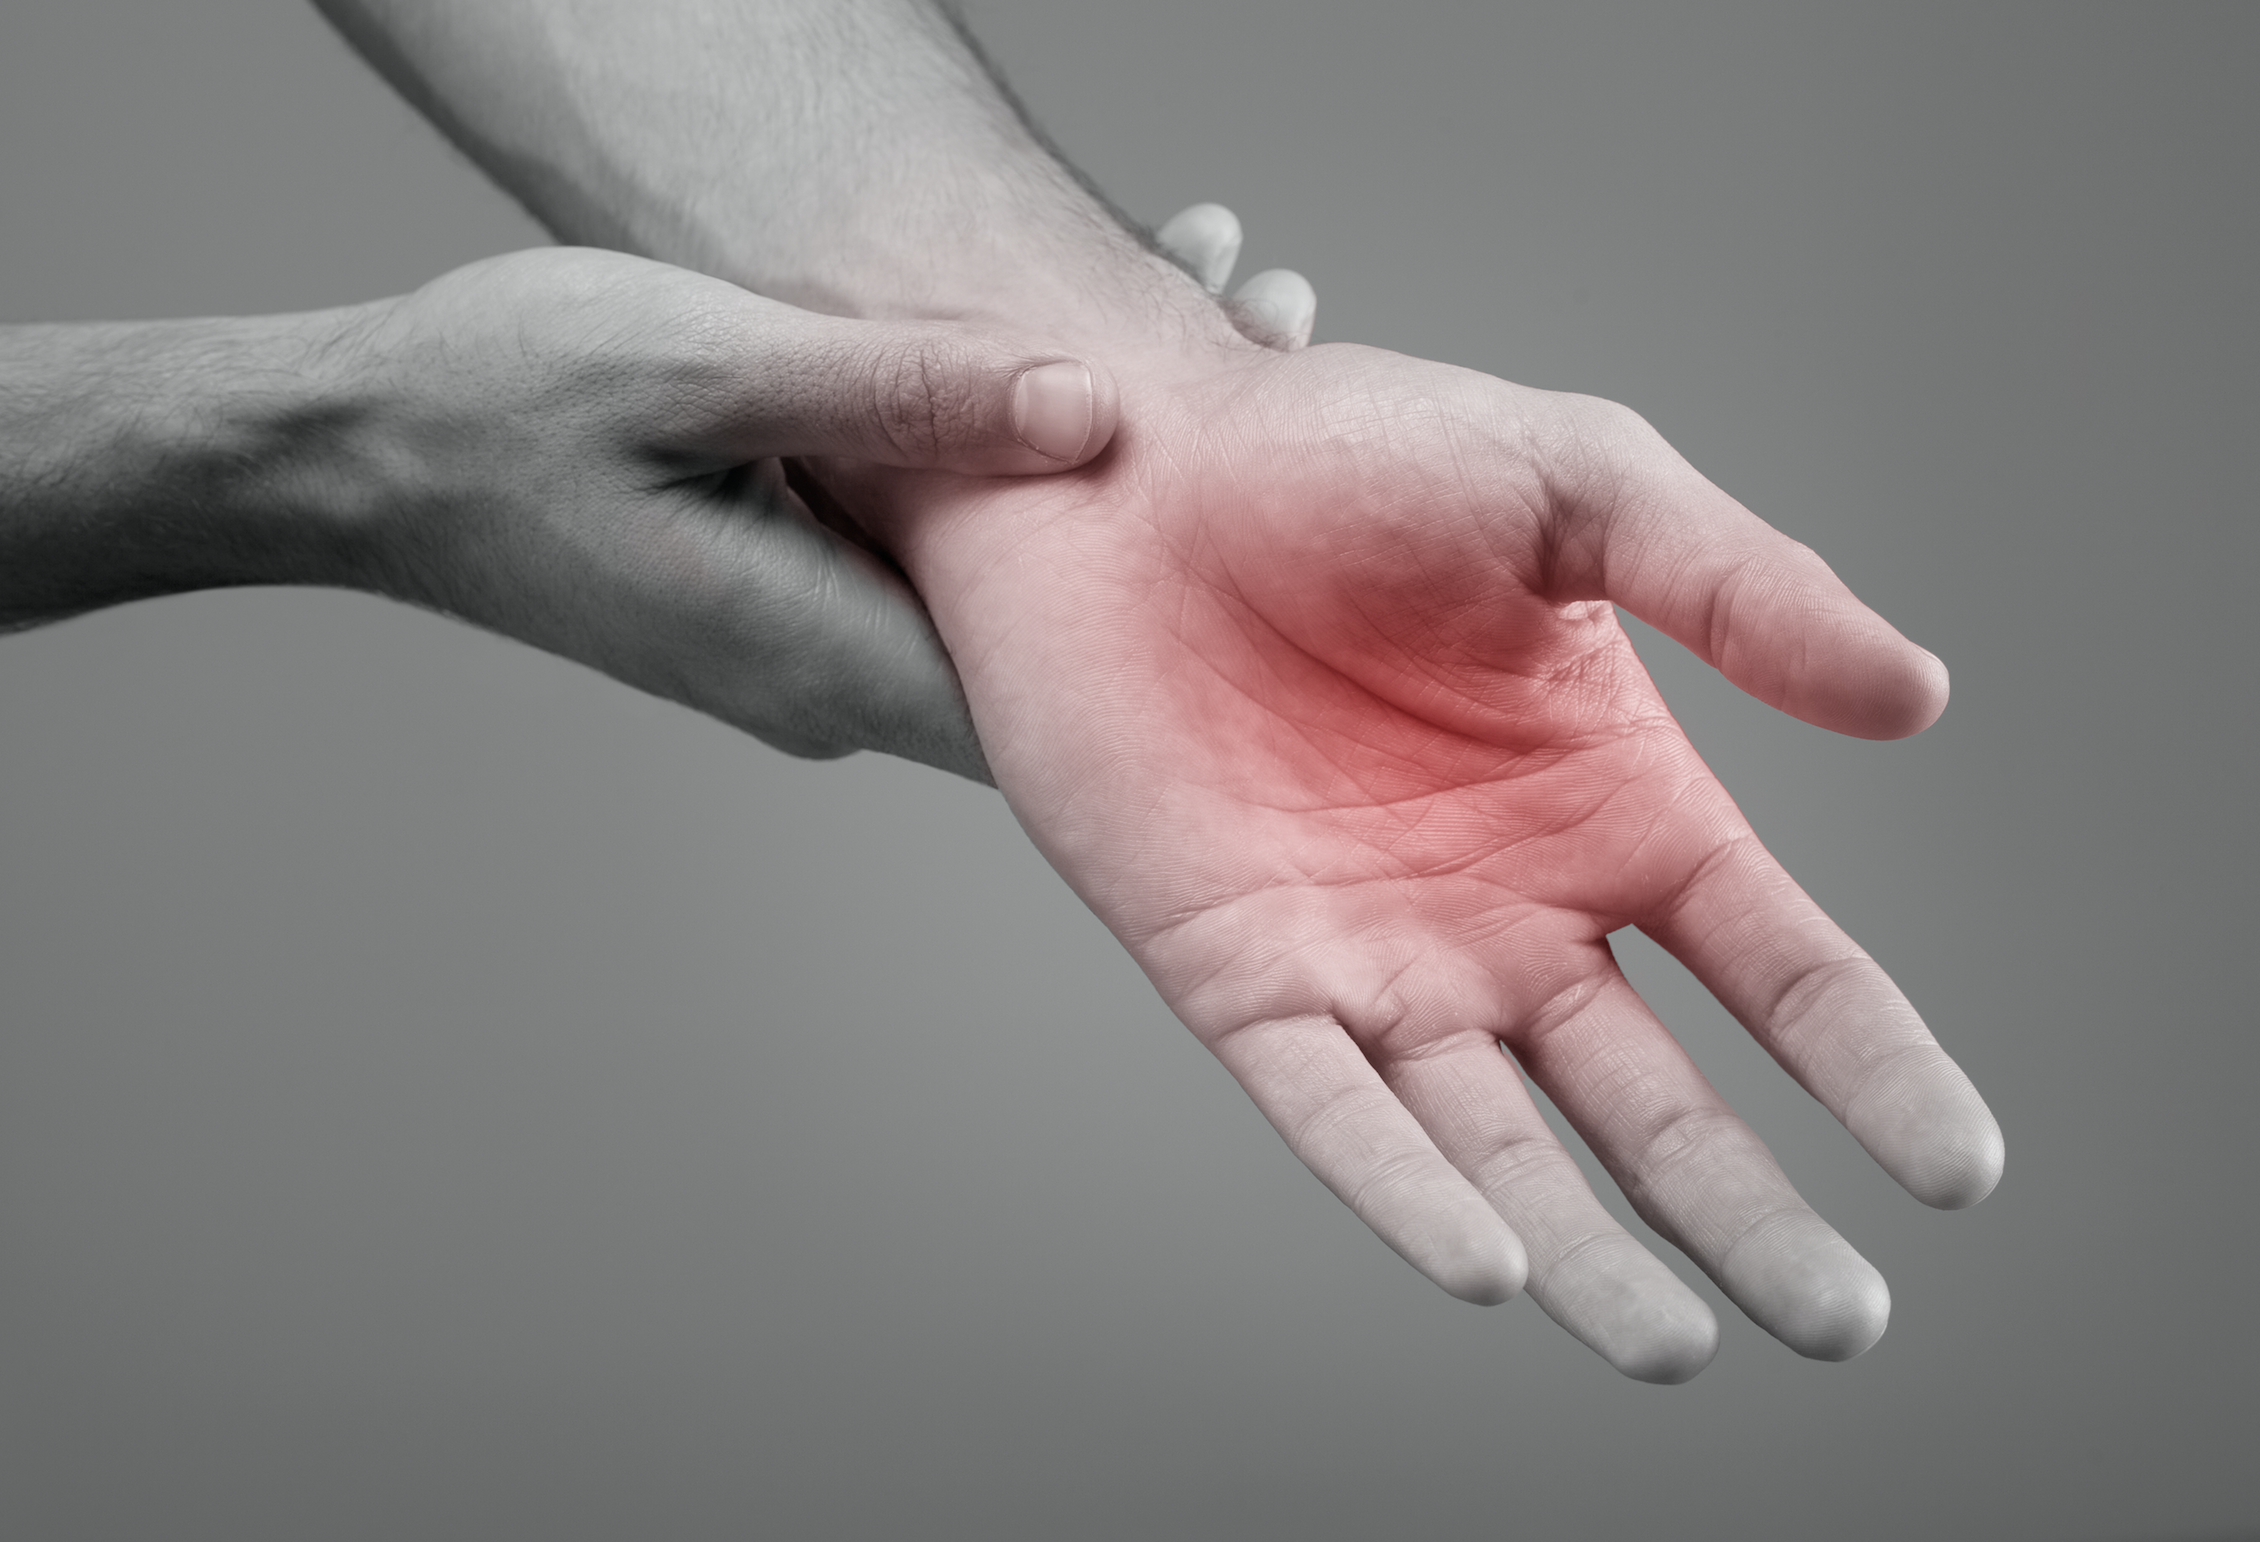 Why Does My Wrist Hurt? You May Have Dorsal Wrist Impingement Syndrome.